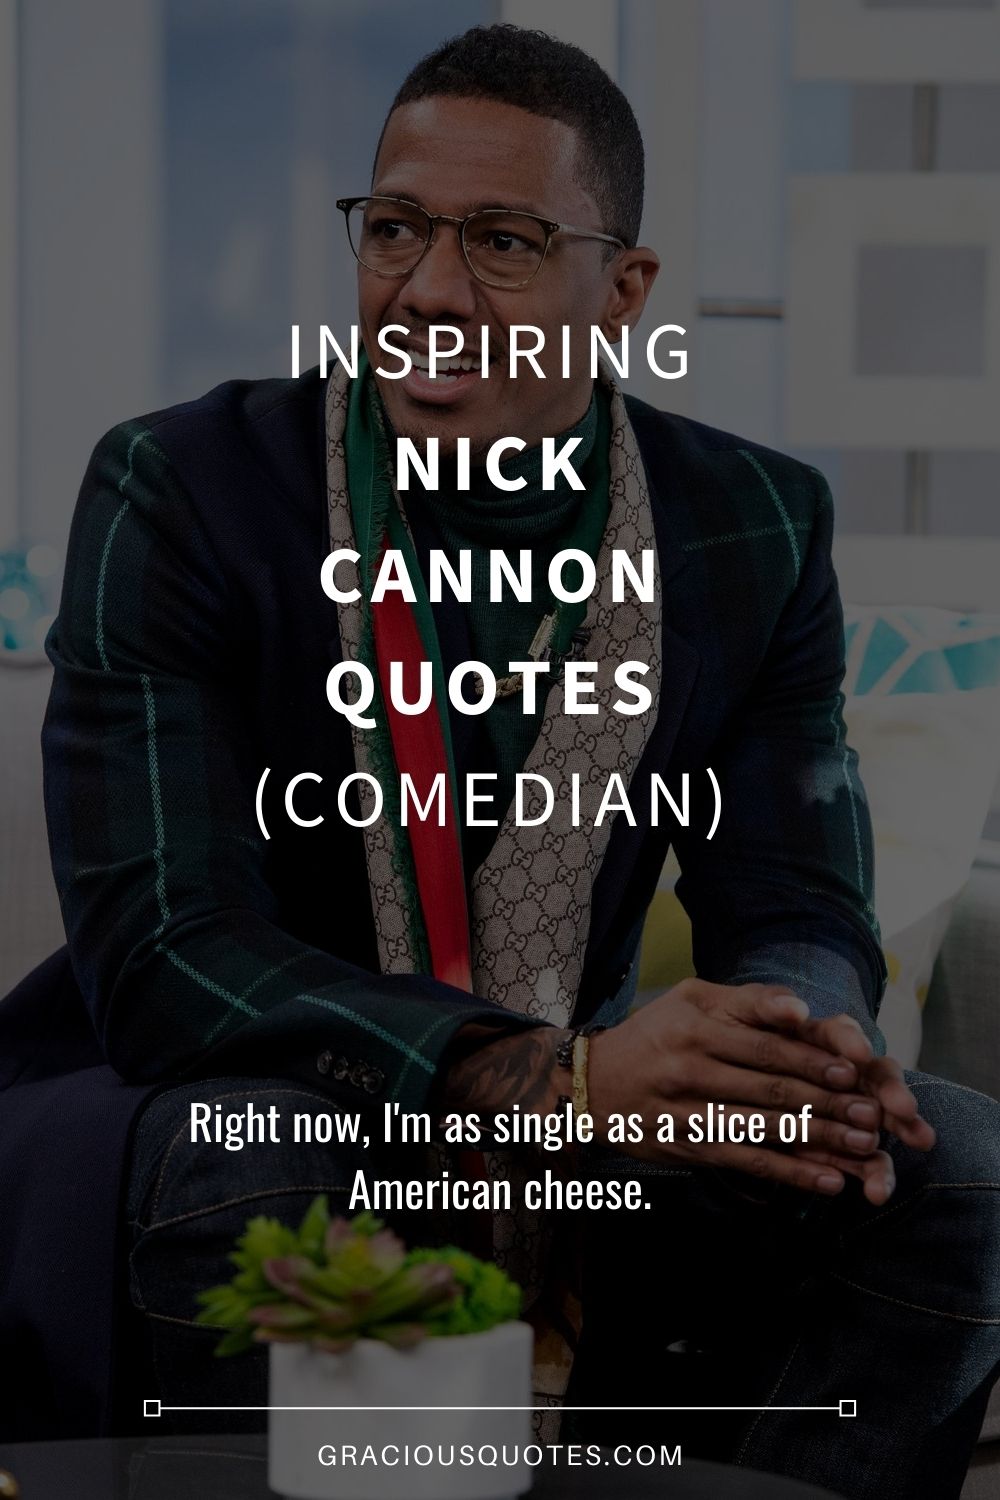 Inspiring Nick Cannon Quotes (COMEDIAN) - Gracious Quotes